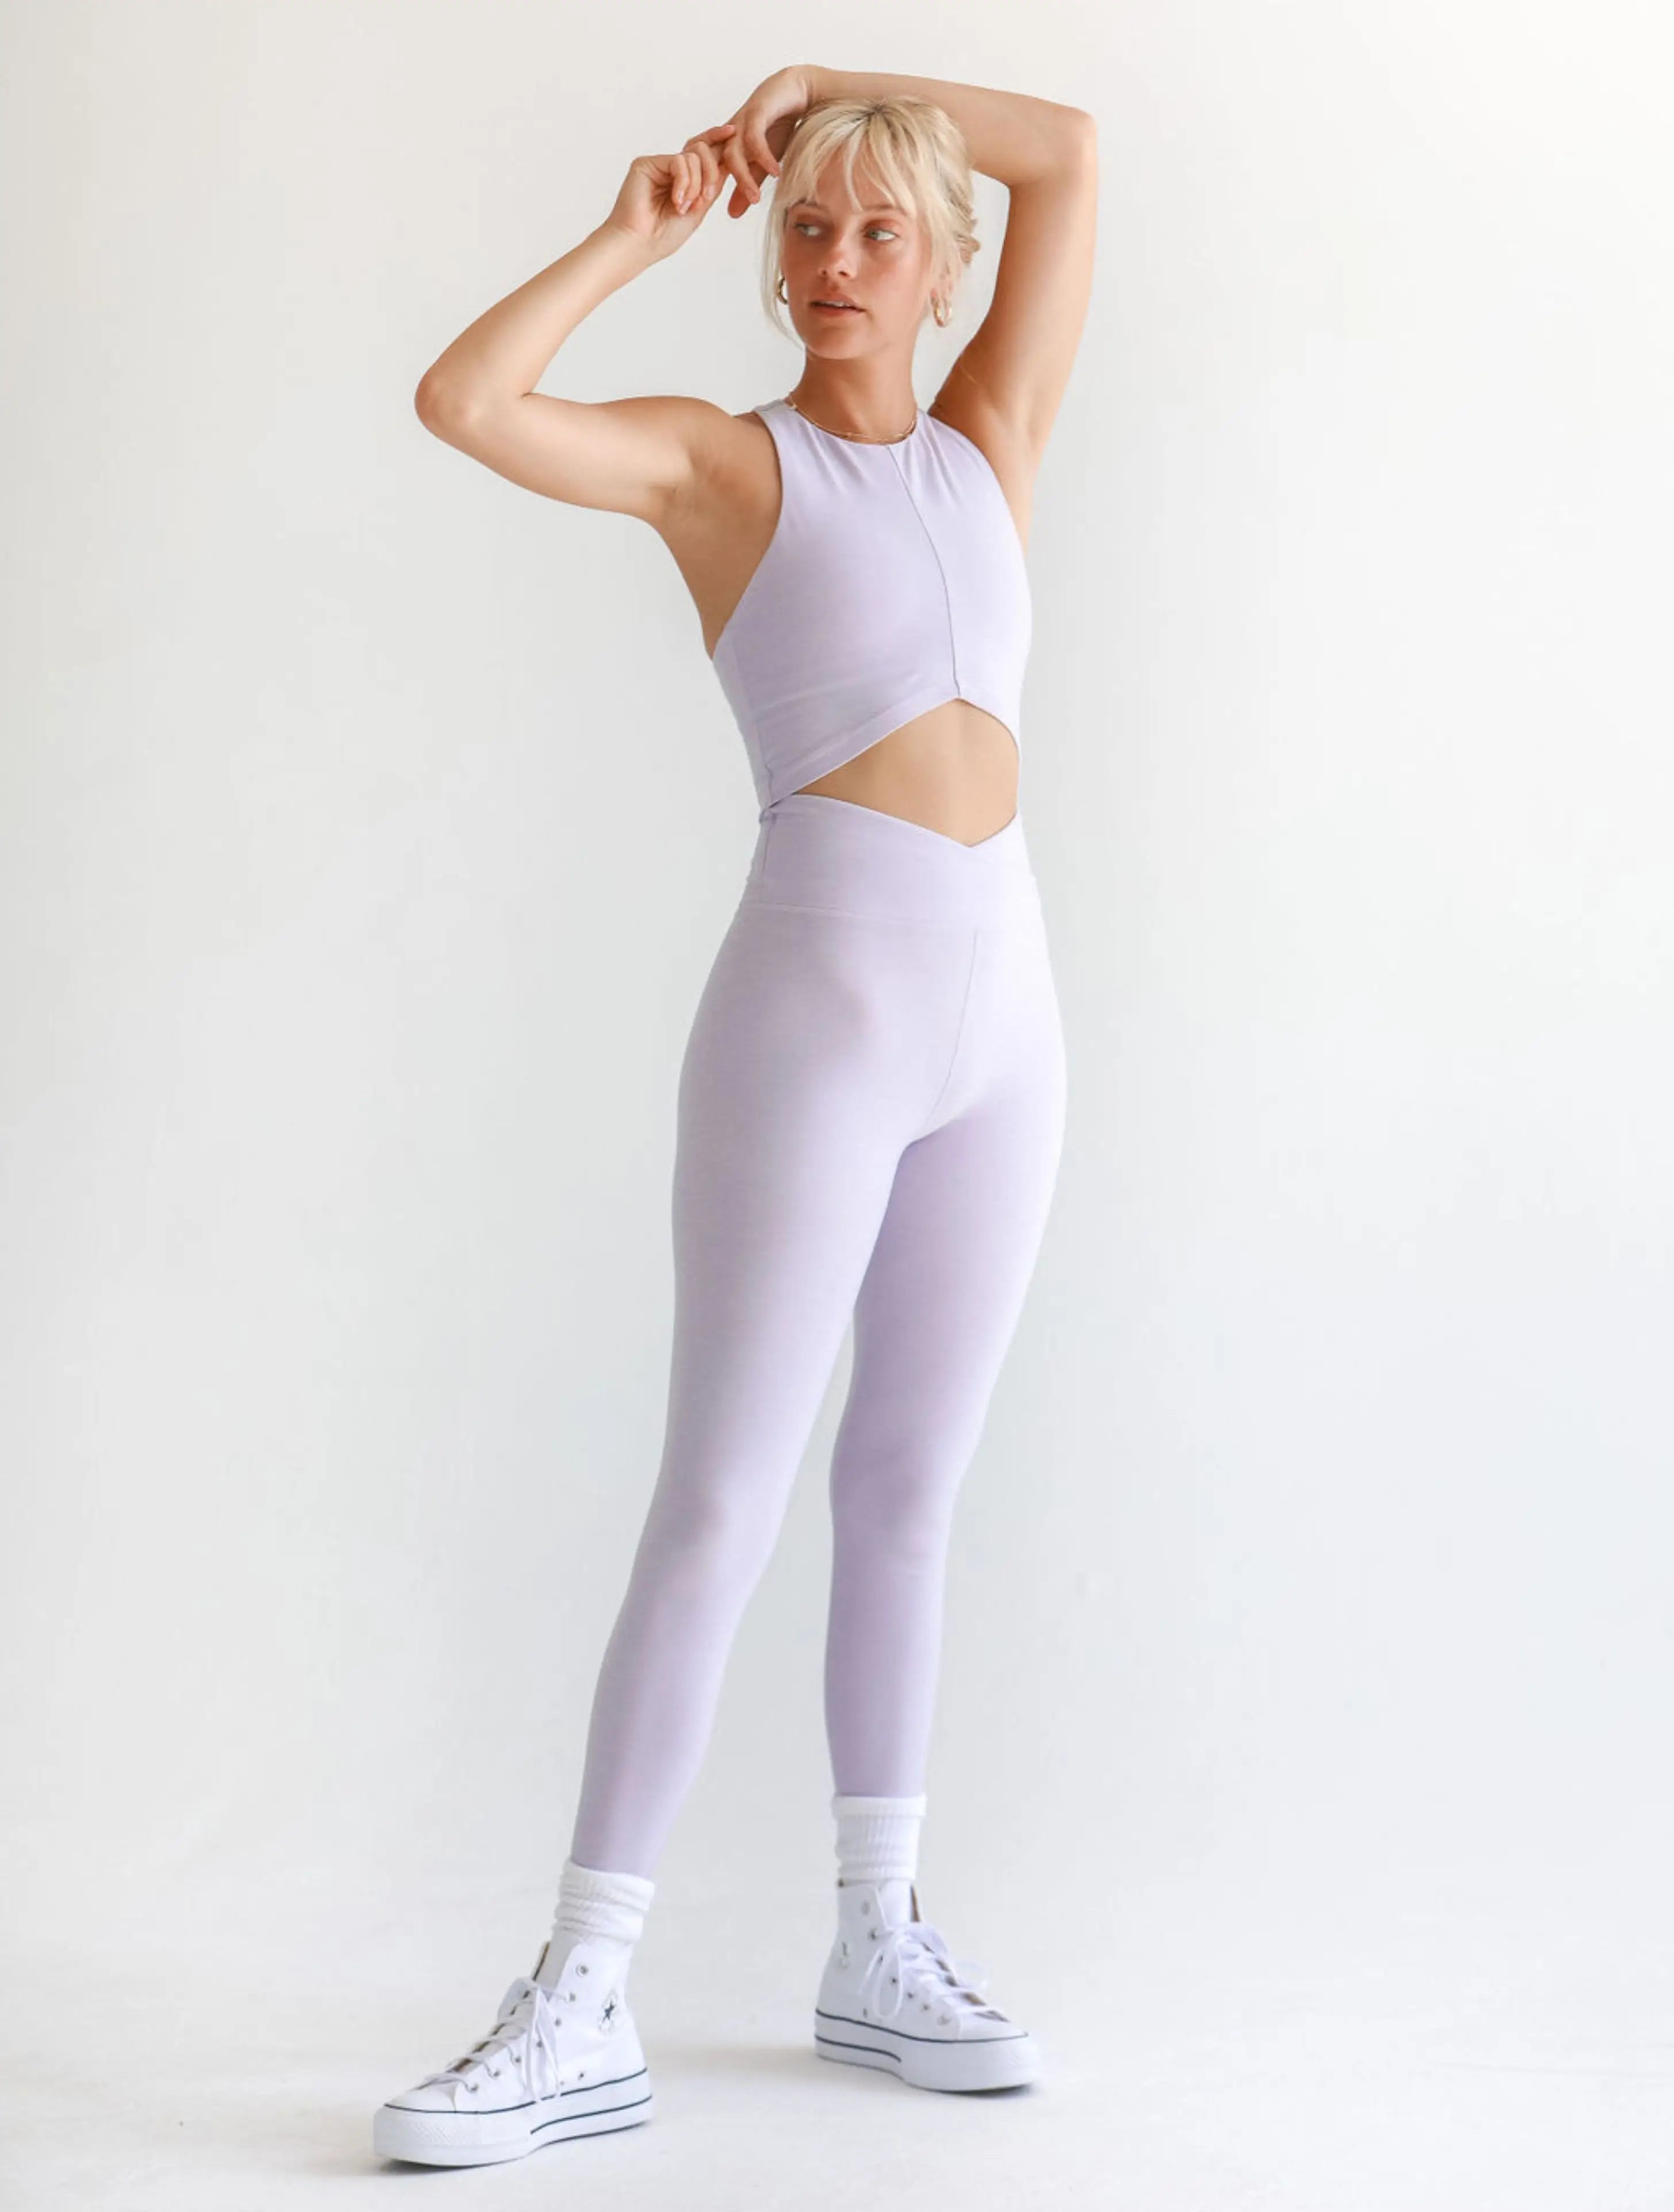 Curate - Sustainable & Ethical Women's Apparel - Activewear